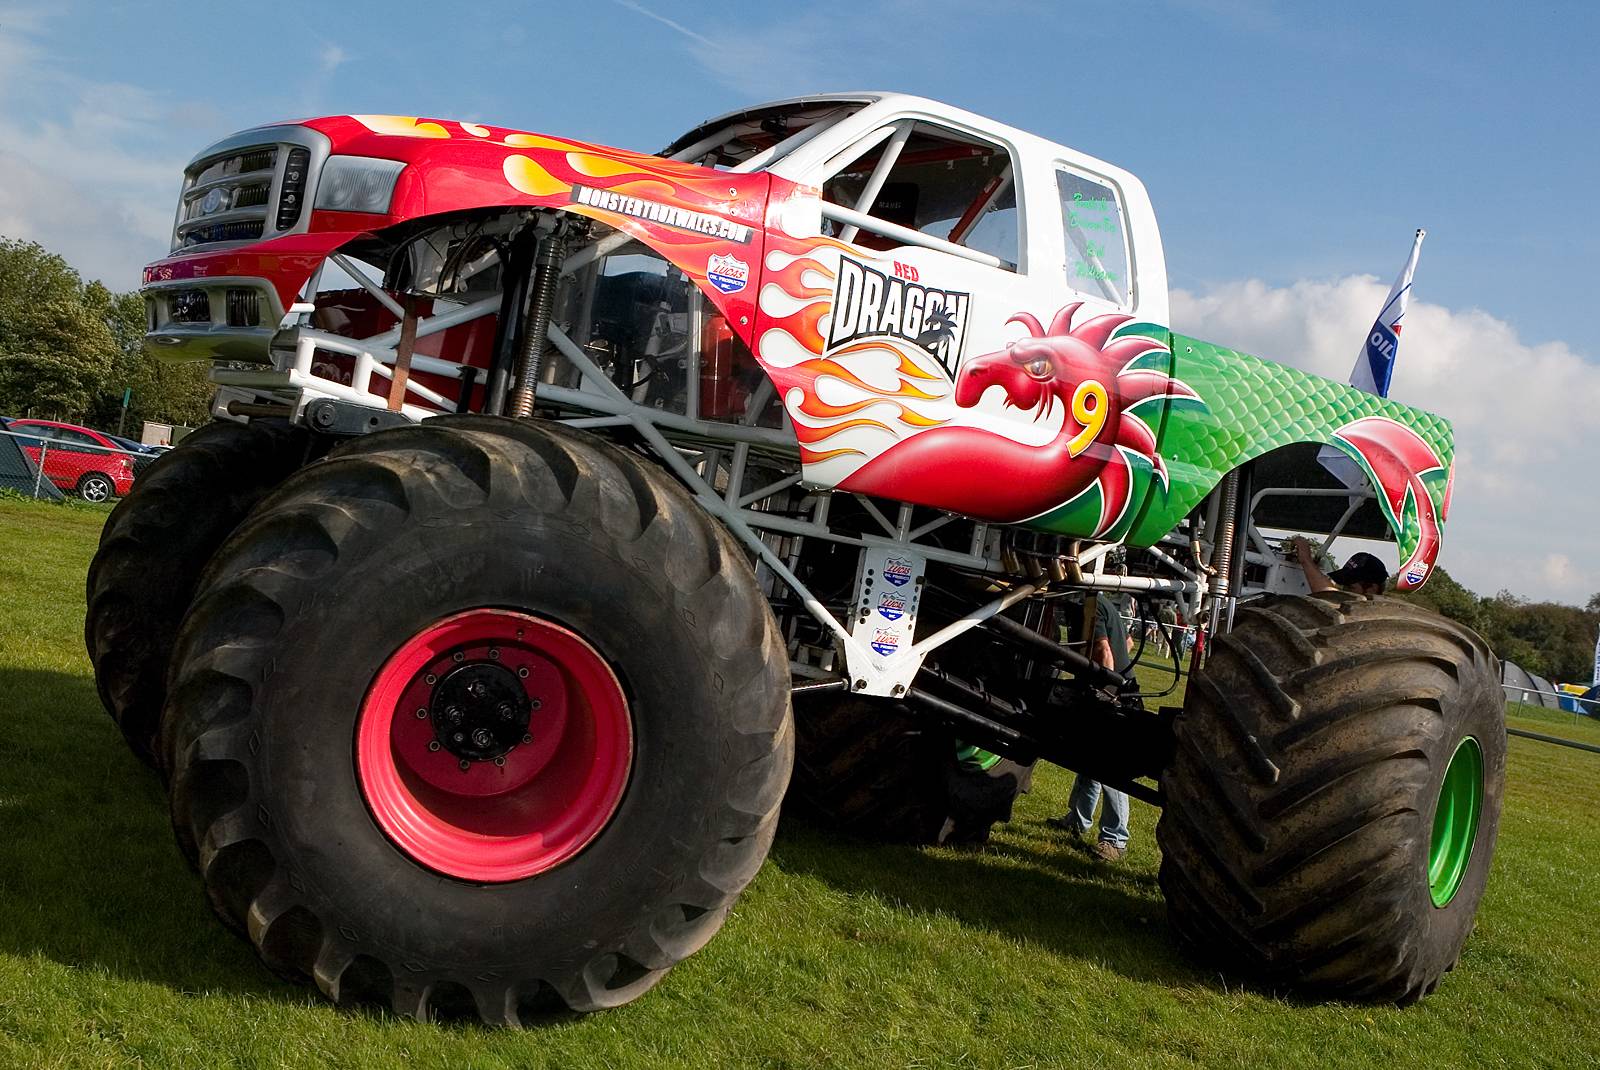 monstertrucks wallpapers picture 23802/ Wallpapers high quality